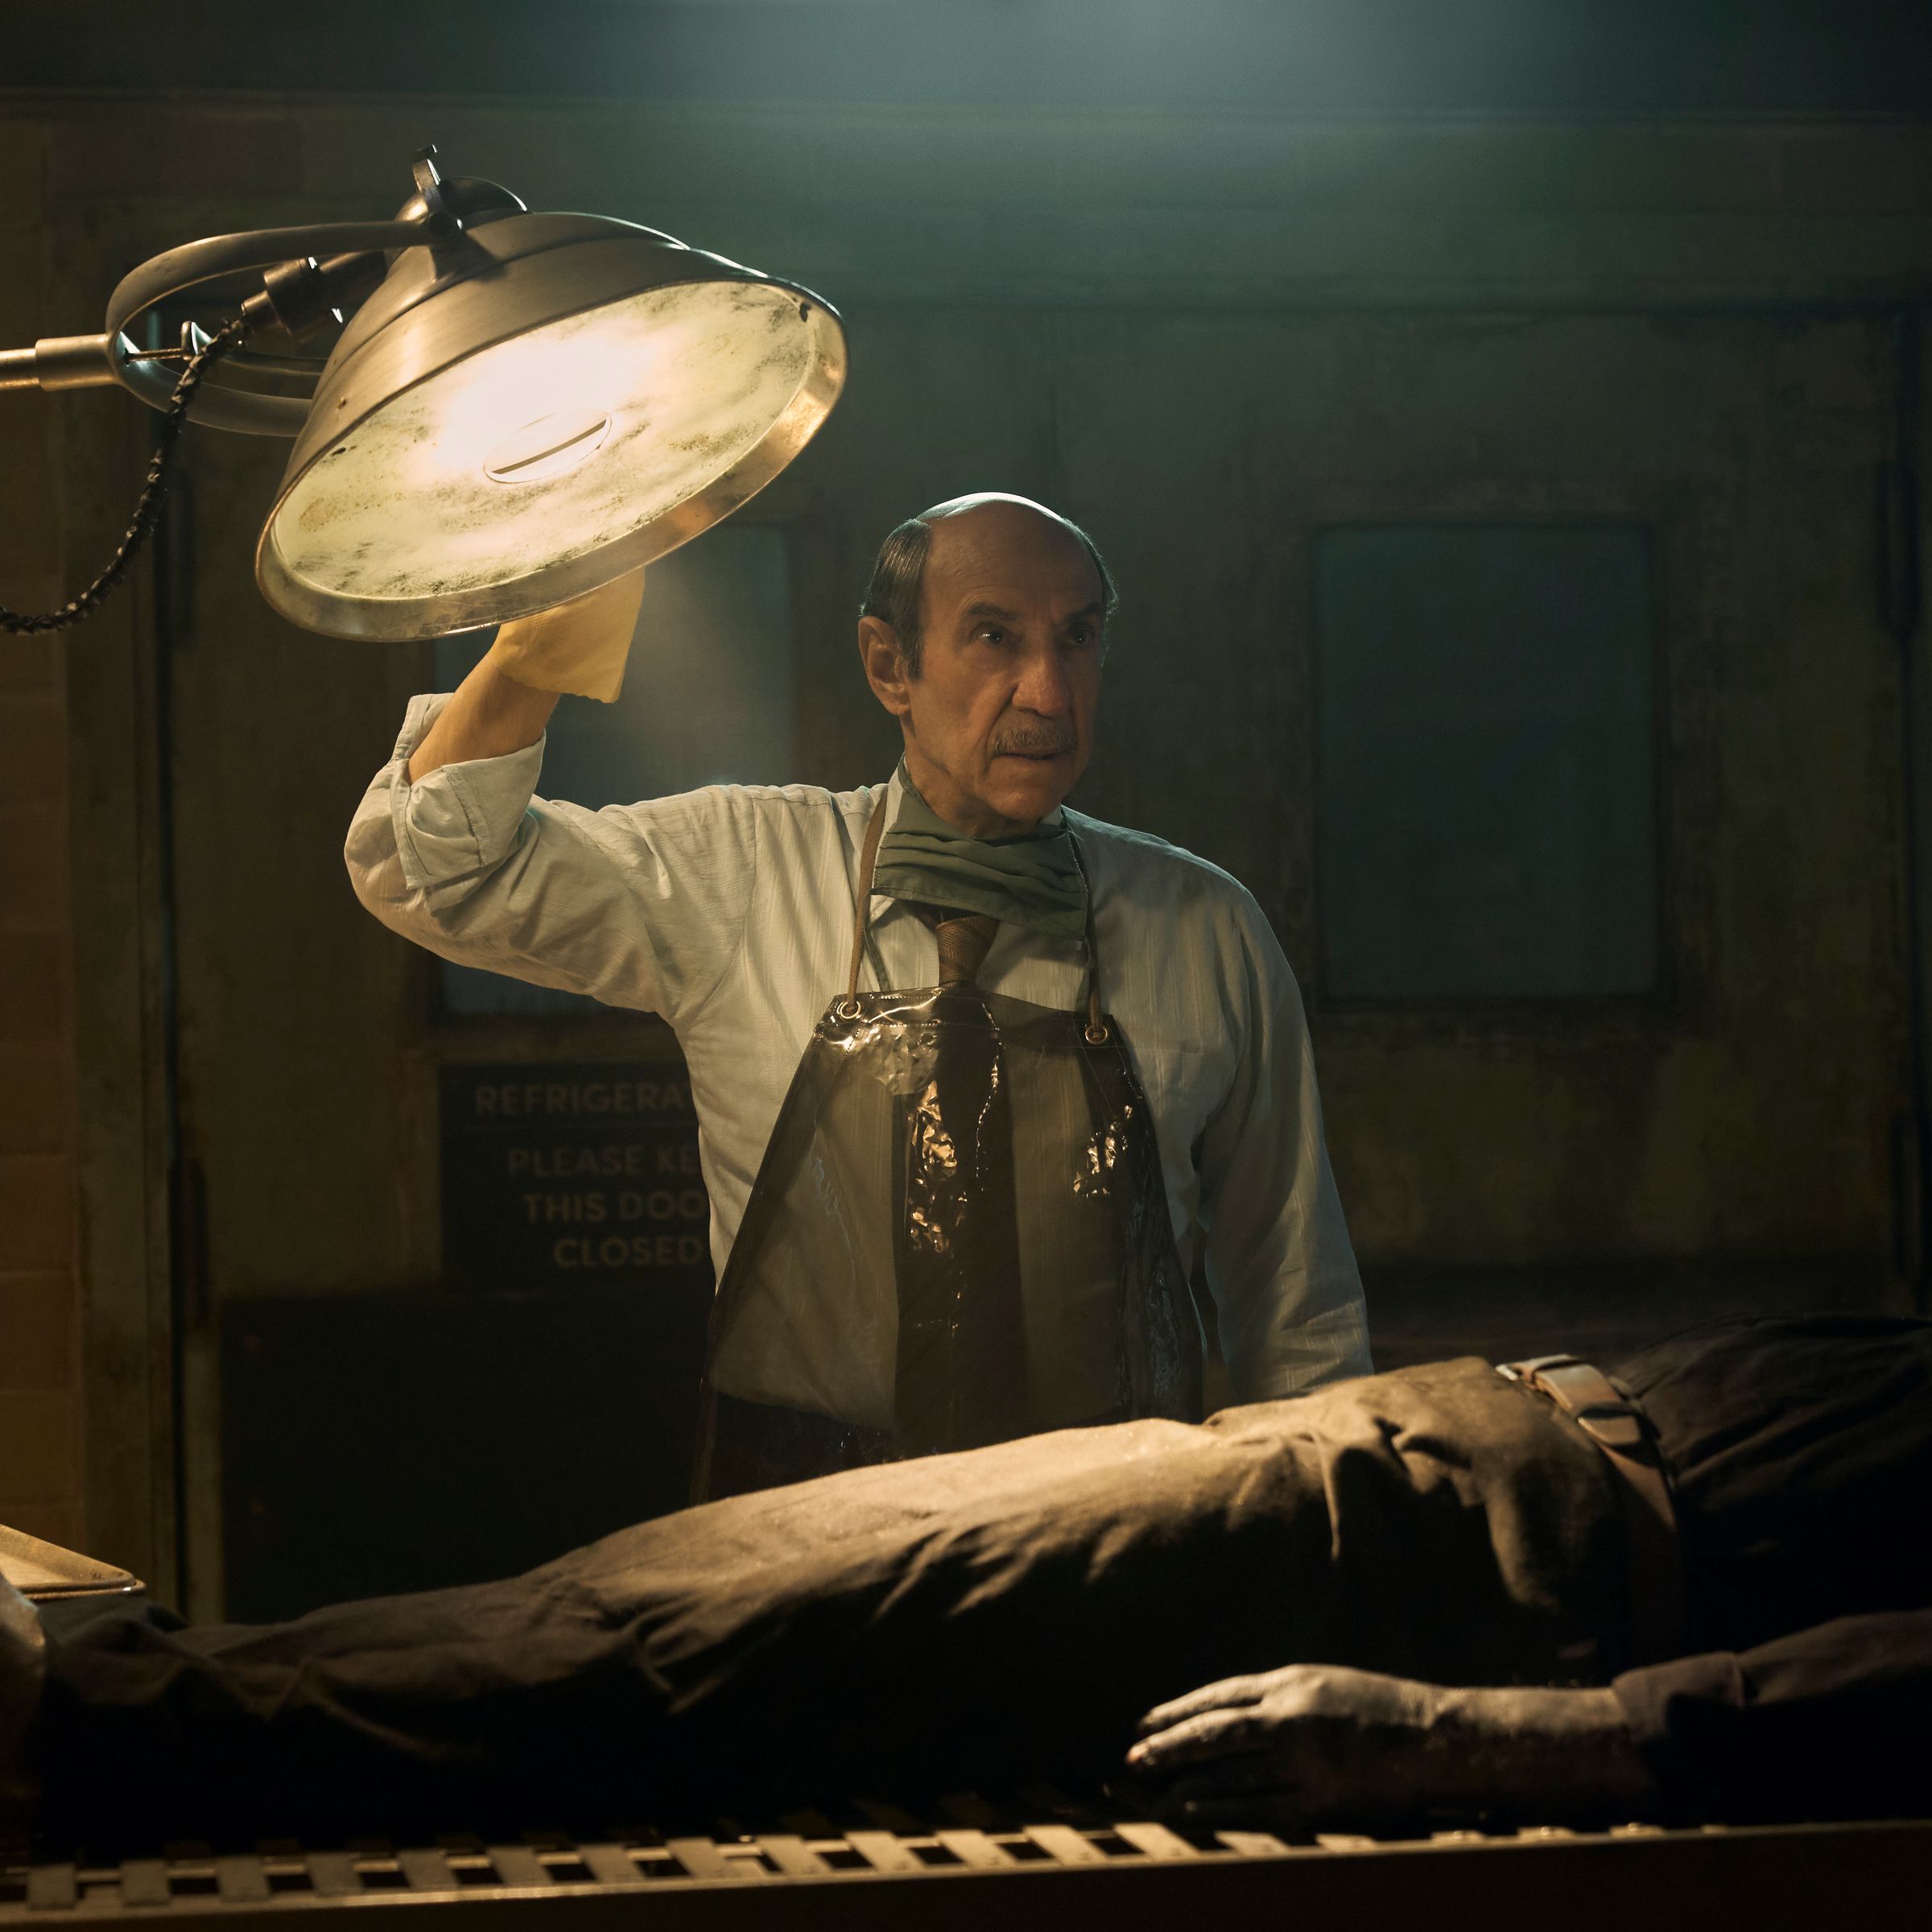 F. Murray Abraham in Guillermo del Toro’s Cabinet of Curiosities.